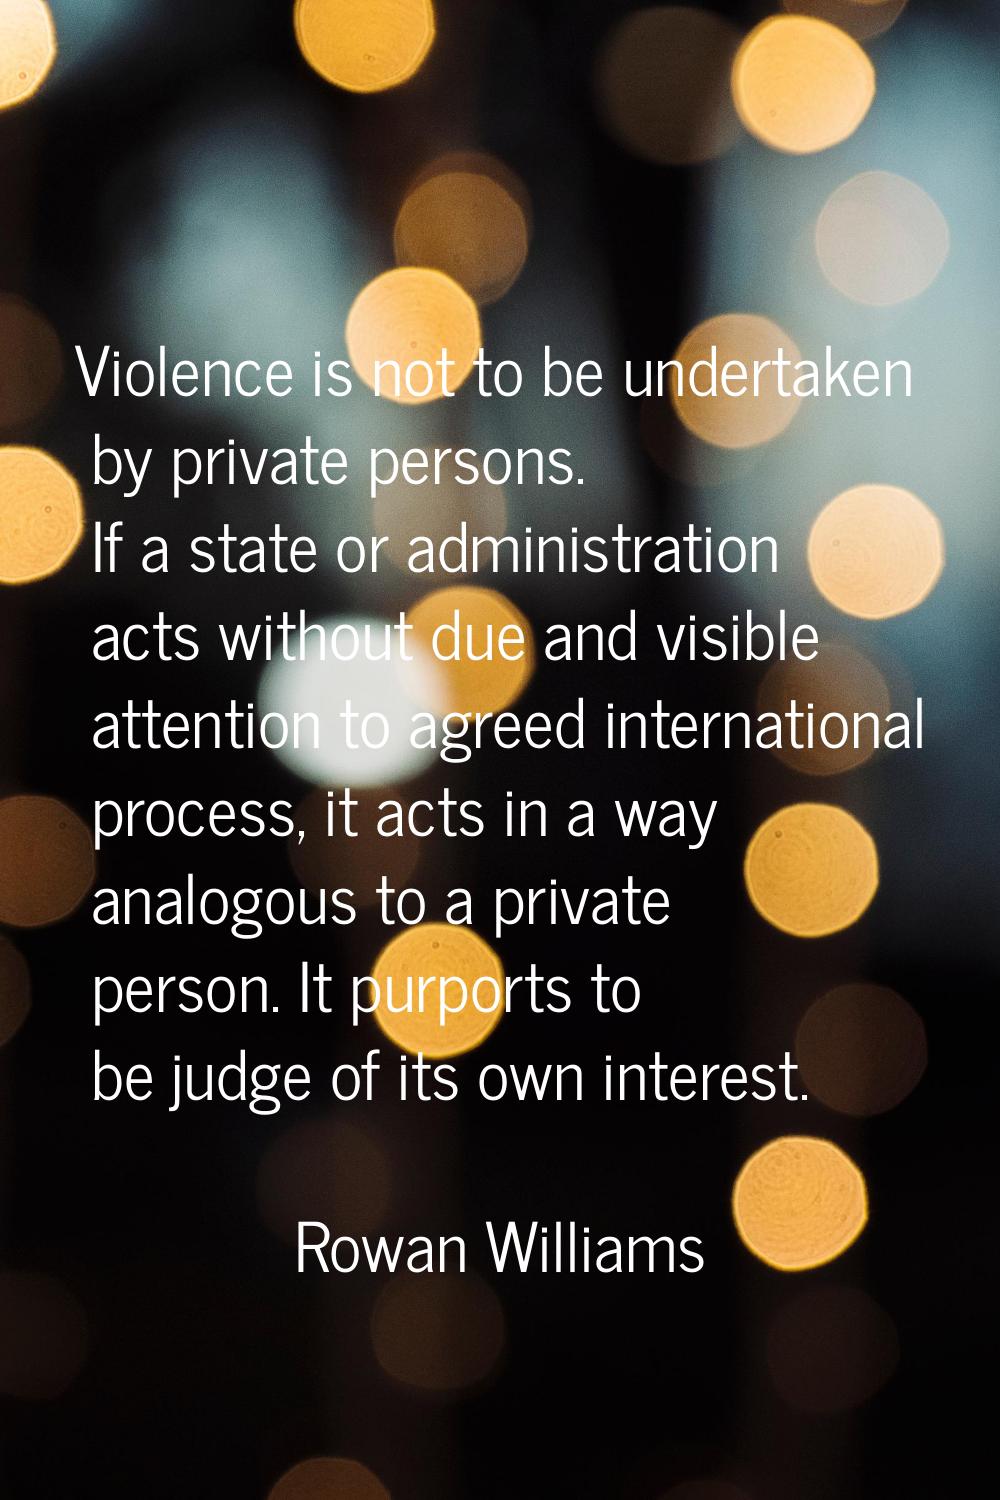 Violence is not to be undertaken by private persons. If a state or administration acts without due 